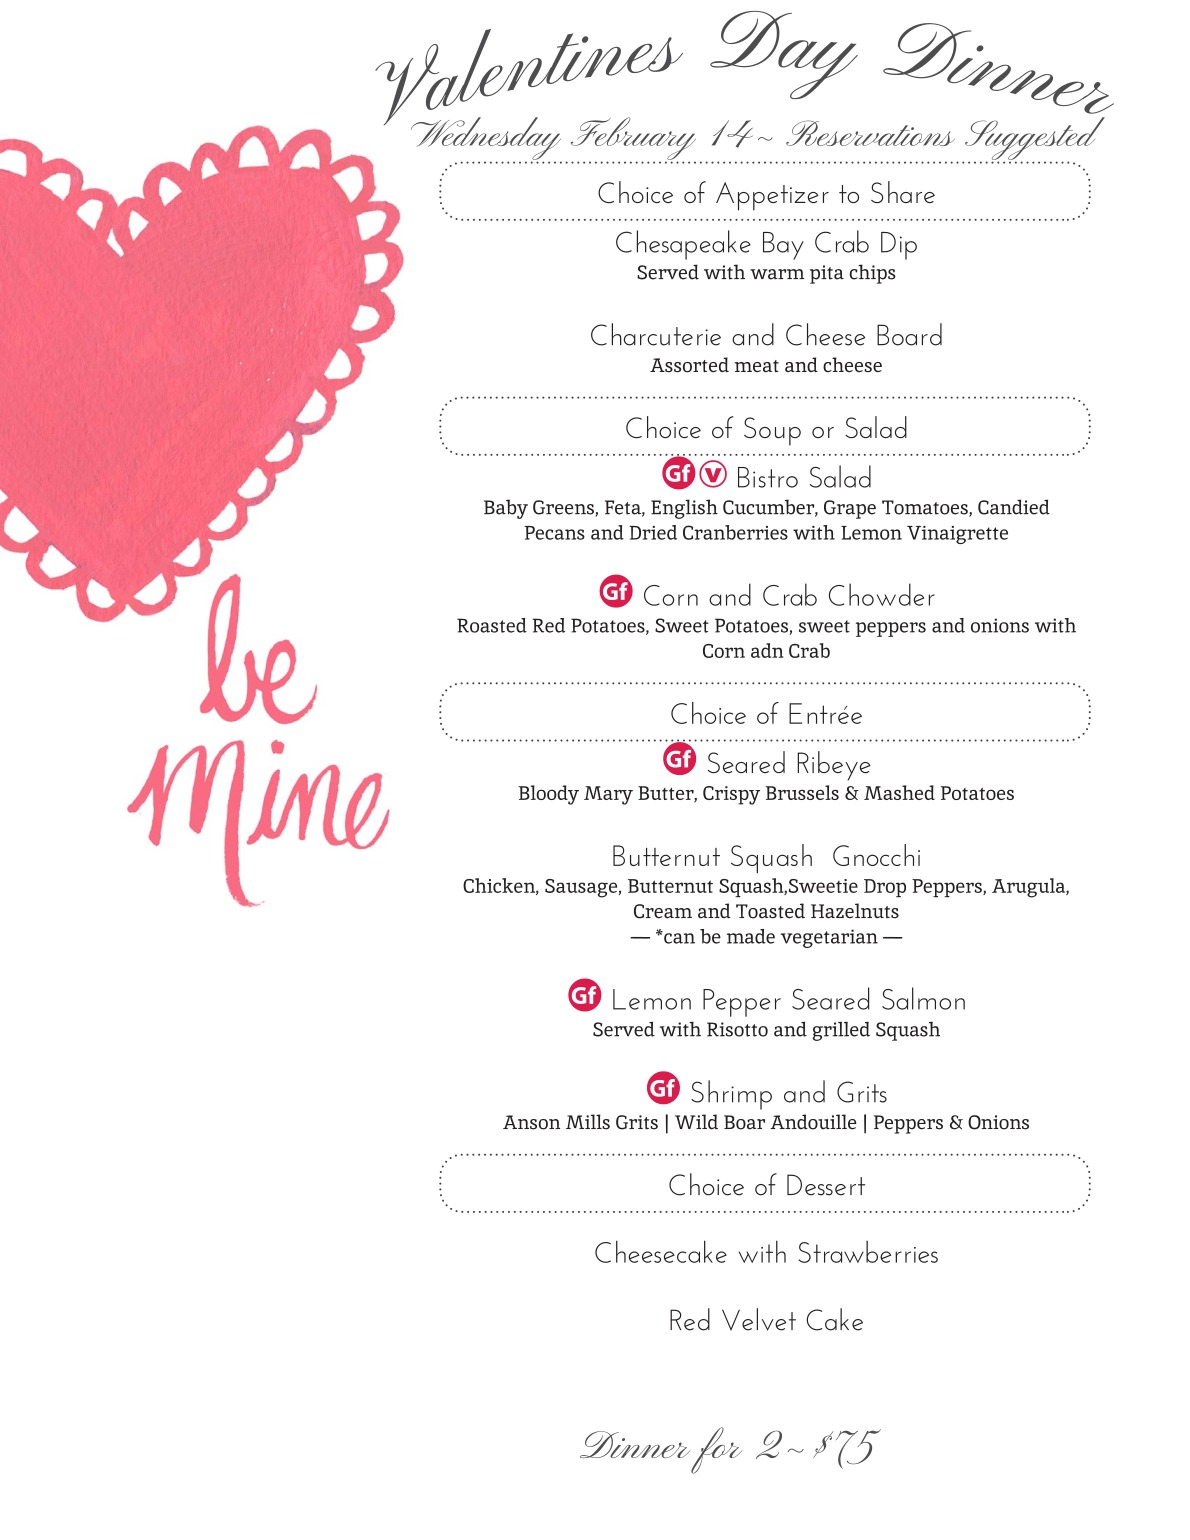 A restaurant menu announcing Valentine's Day four-course meal.